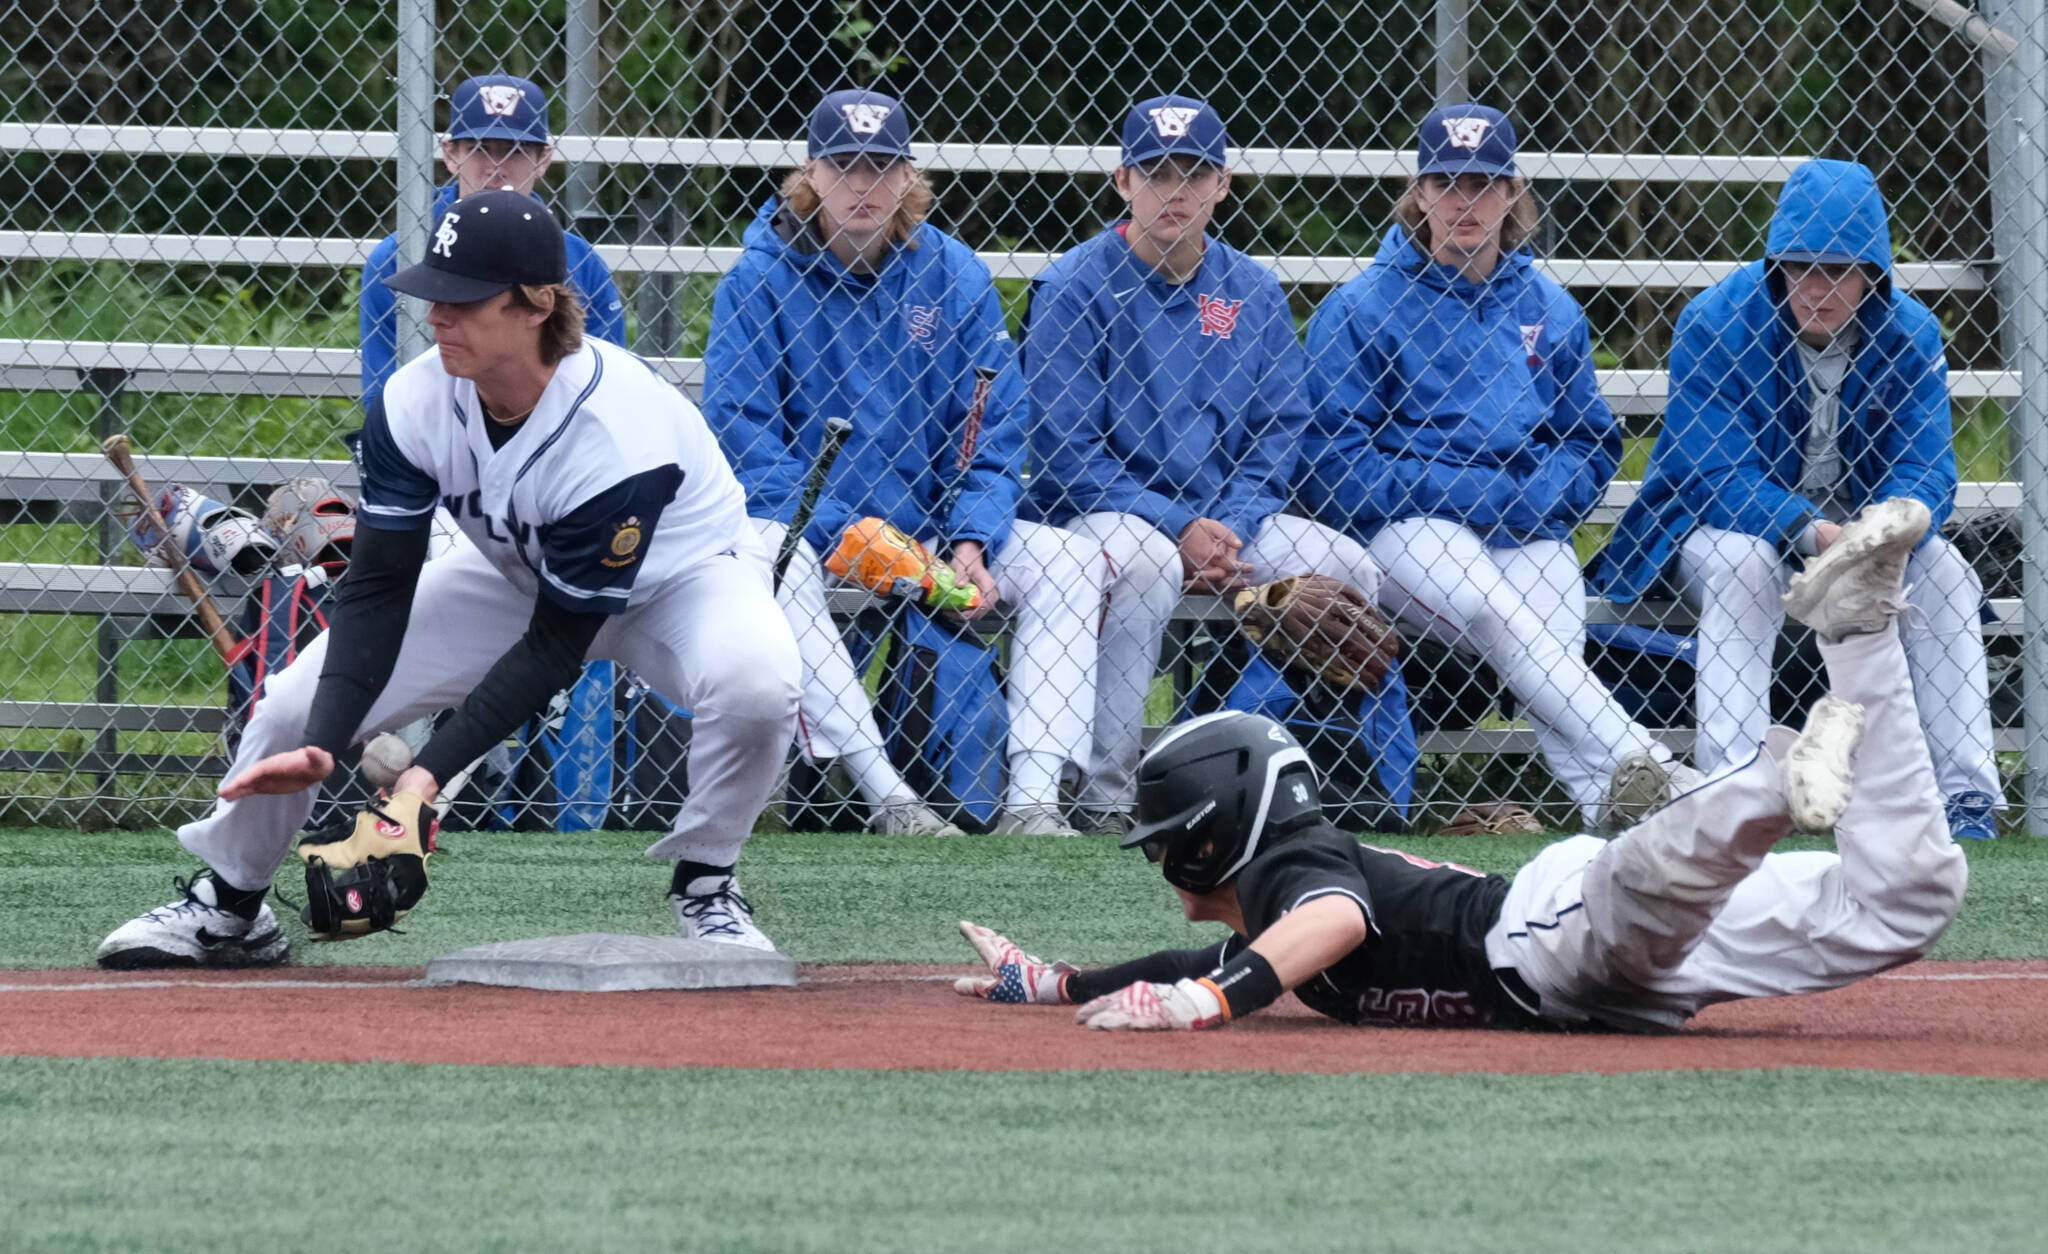 JDHS junior Lamar Blatnick slides safely into third base as Eagle River senior Alexander Mullen bobbles the ball during the Crimson Bears 2-1 loss to the Wolves in an elimination game Friday at the ASAA Division I State Baseball Championships on Sitka’s Moller Field. (Klas Stolpe / Juneau Empire)